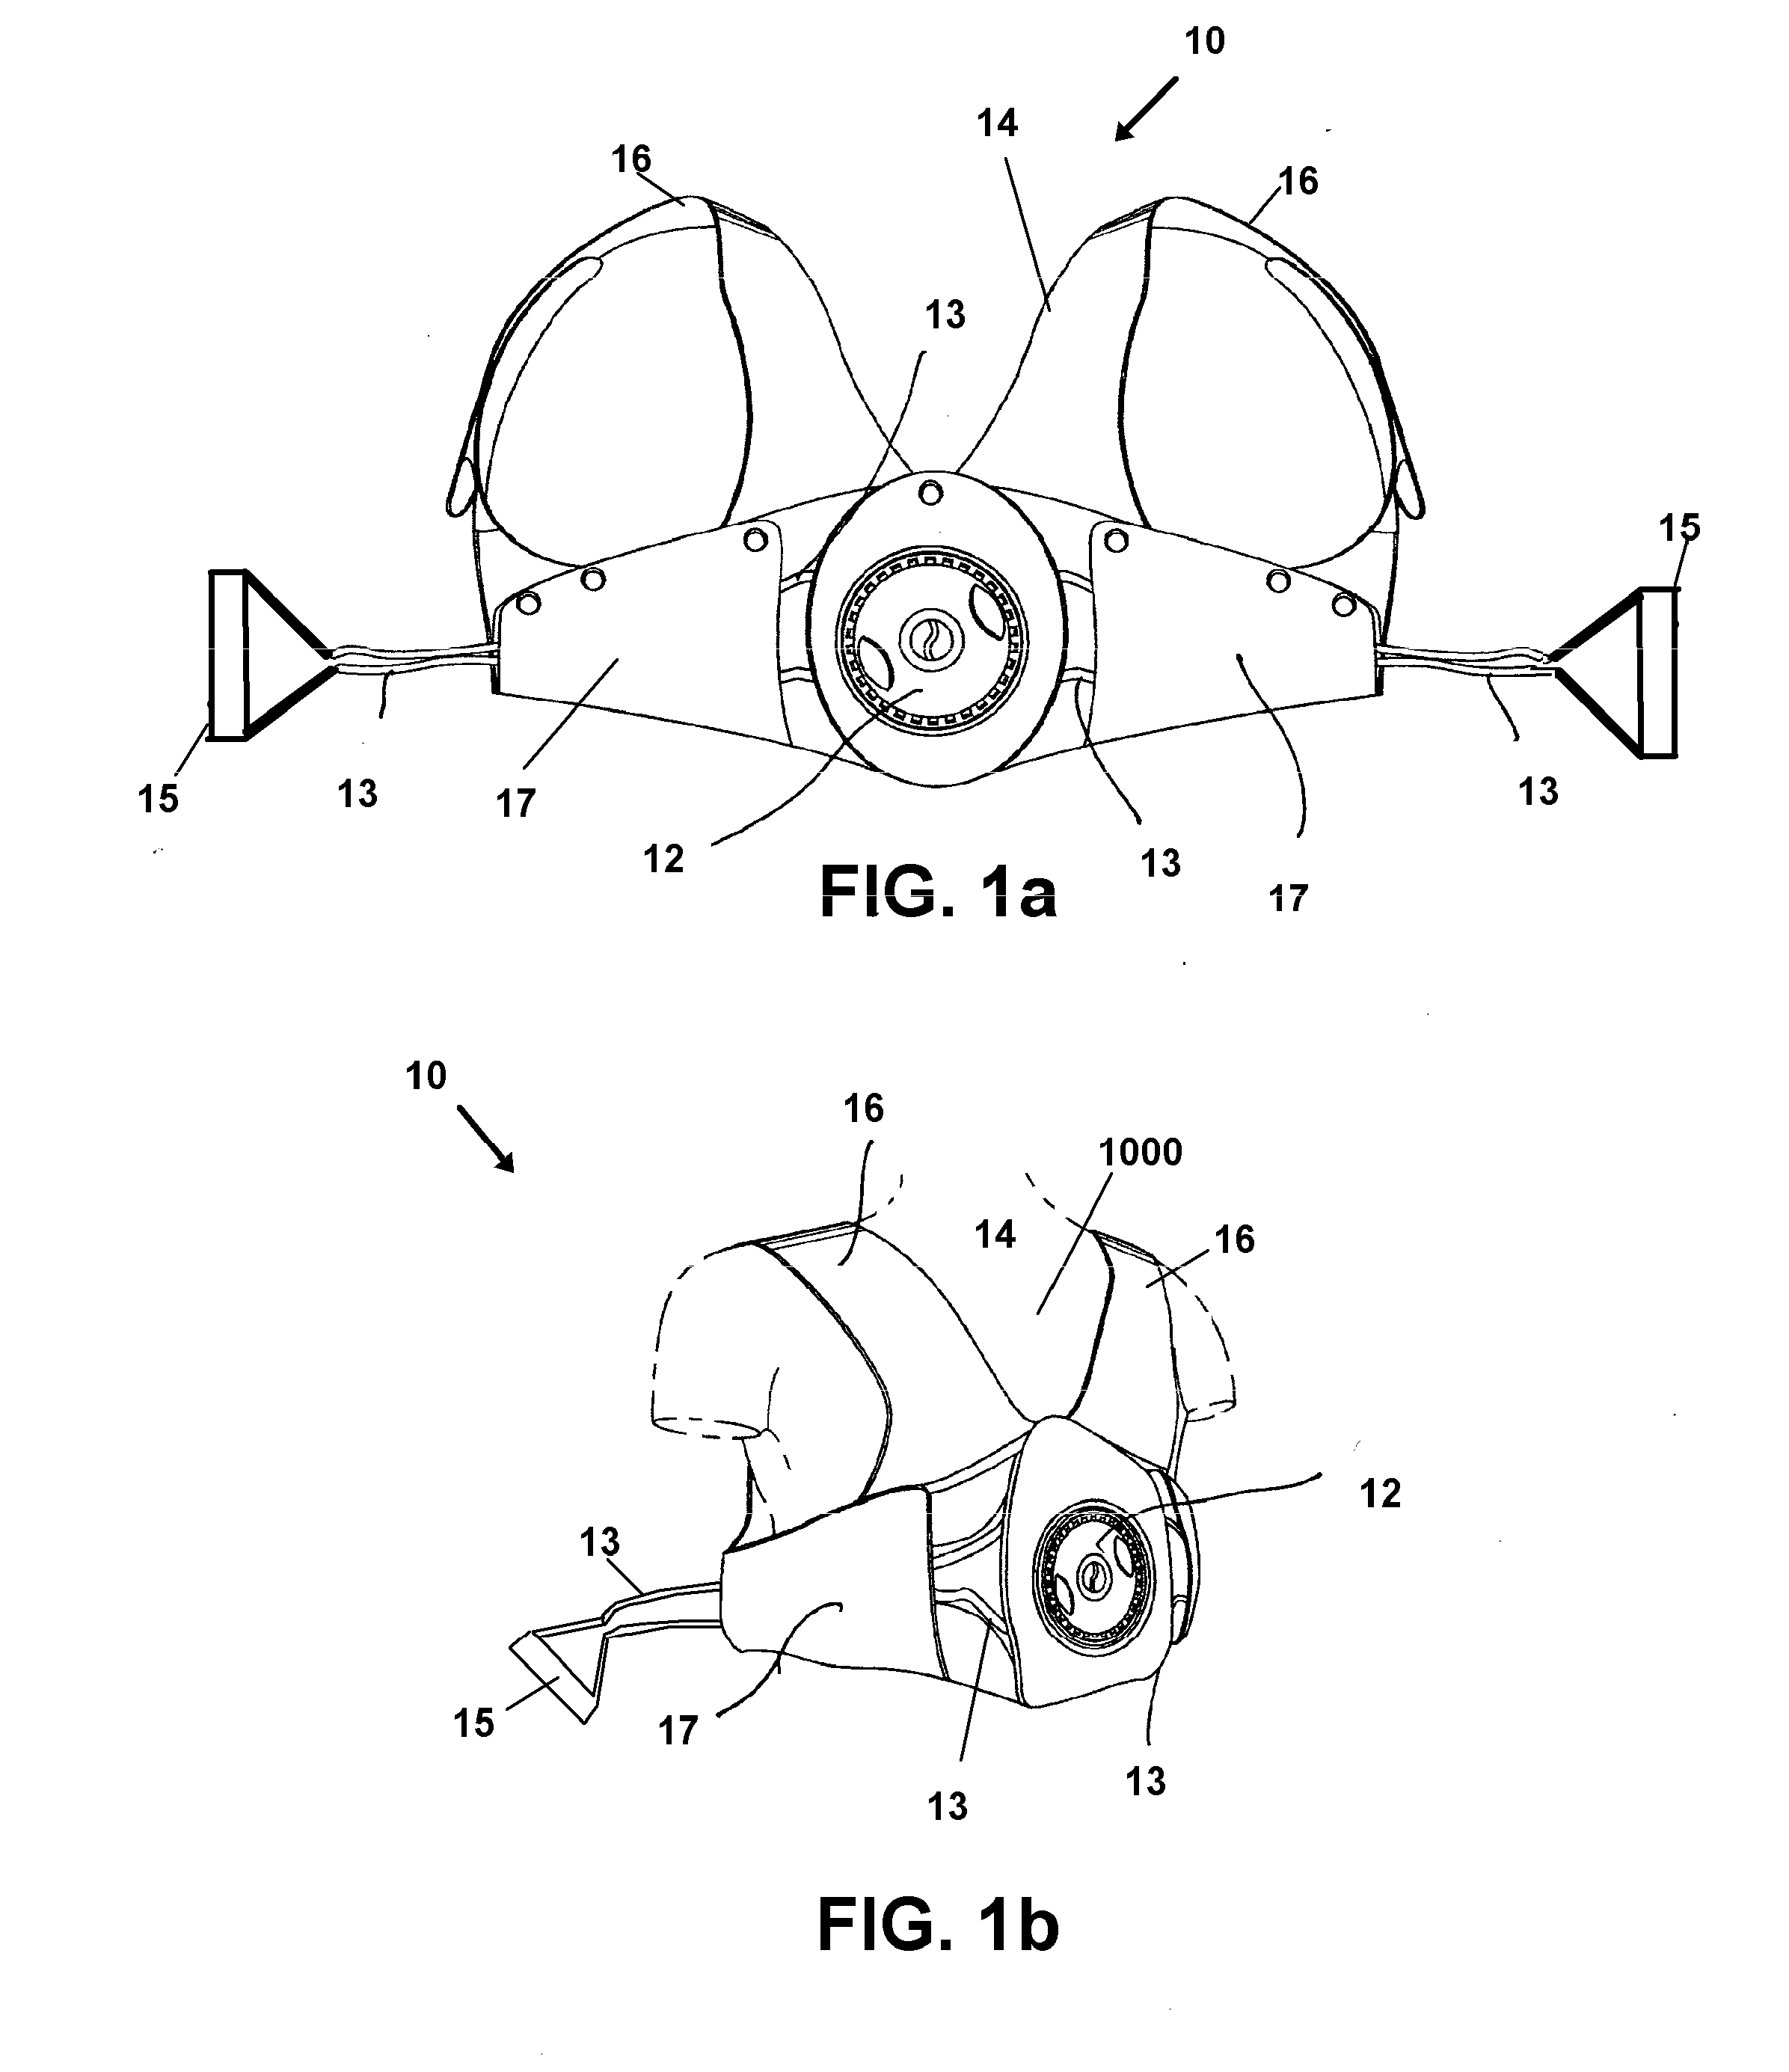 Physical Work-Out Device with Adjustable Elastic Bands